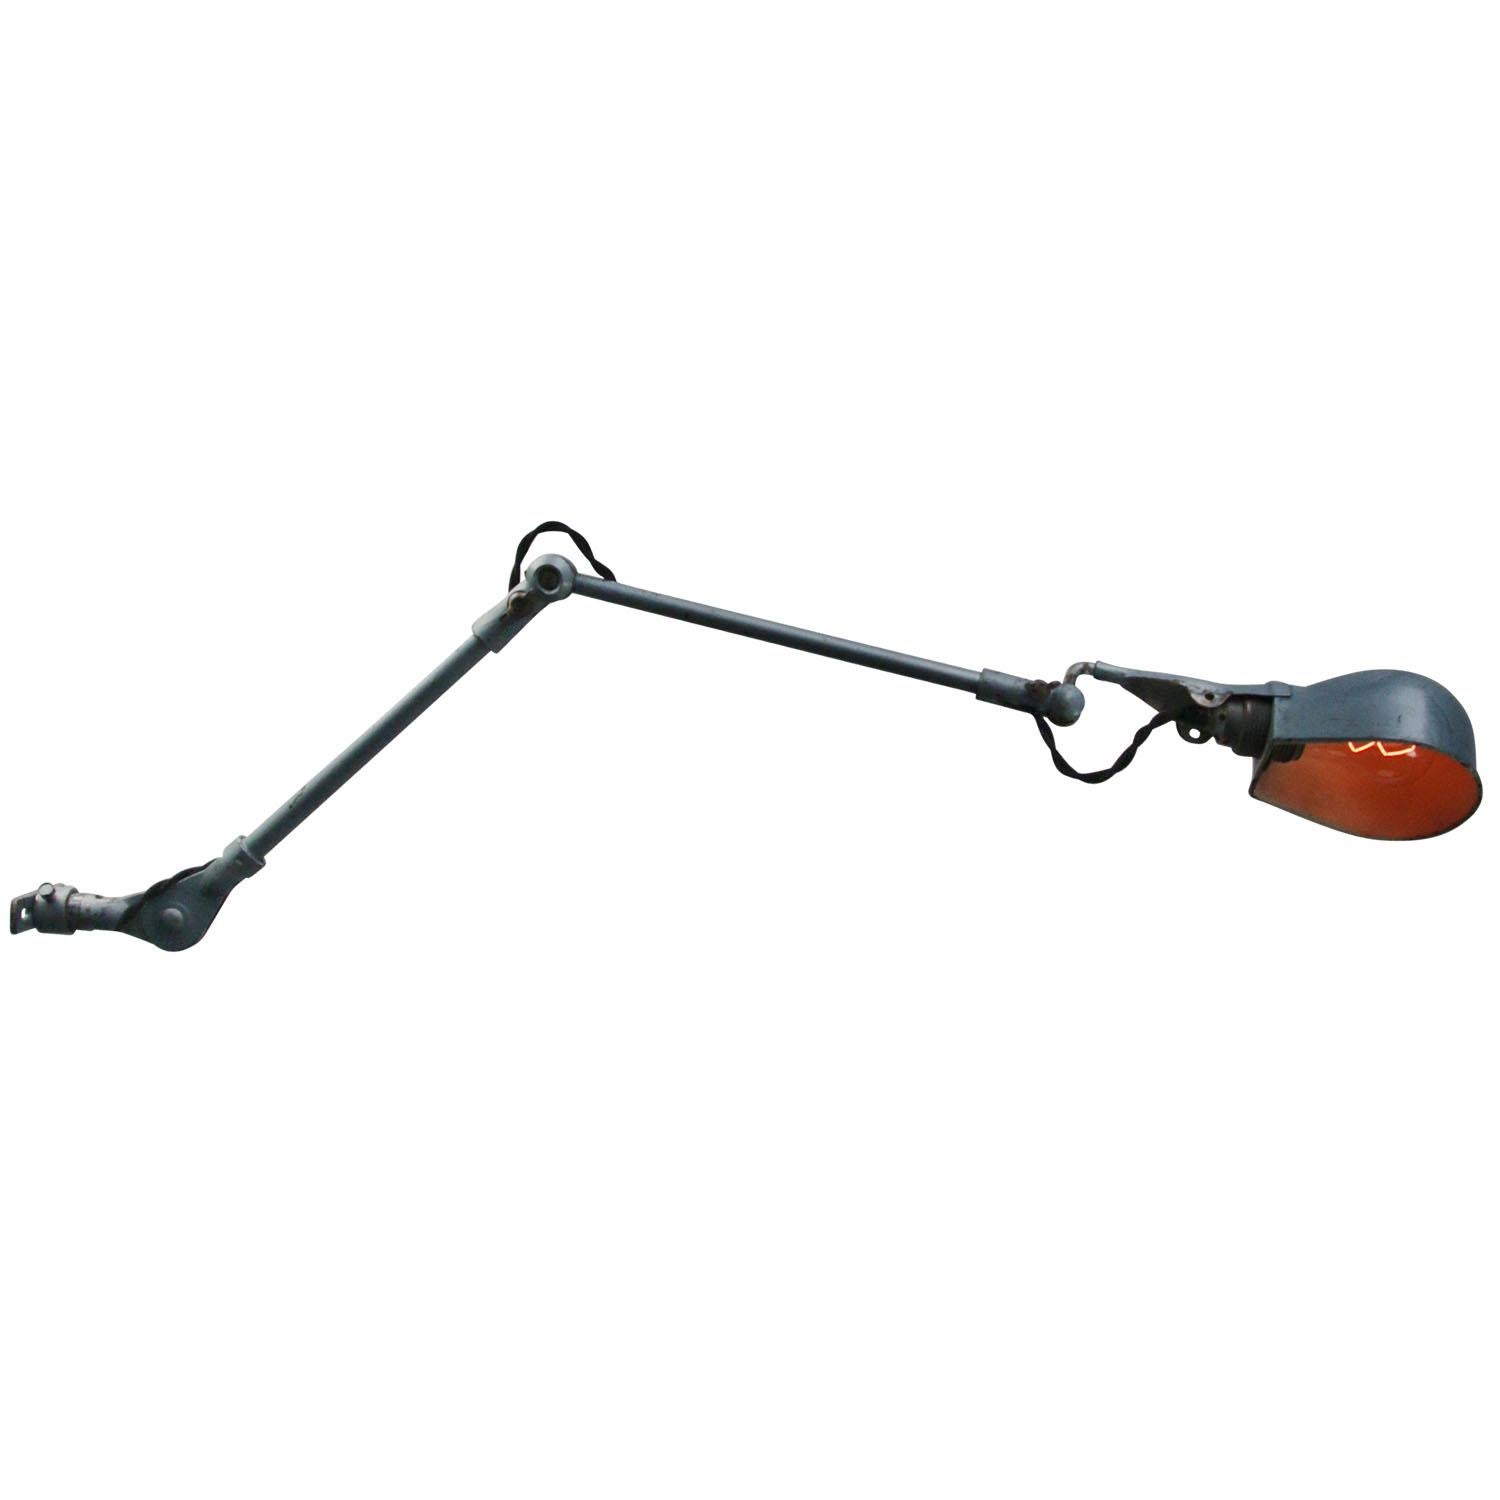 Industrial work light with blue metal shade.
Including plug and switch

Weight: 1.10 kg / 2.4 lb

Priced per individual item. All lamps have been made suitable by international standards for incandescent light bulbs, energy-efficient and LED bulbs.